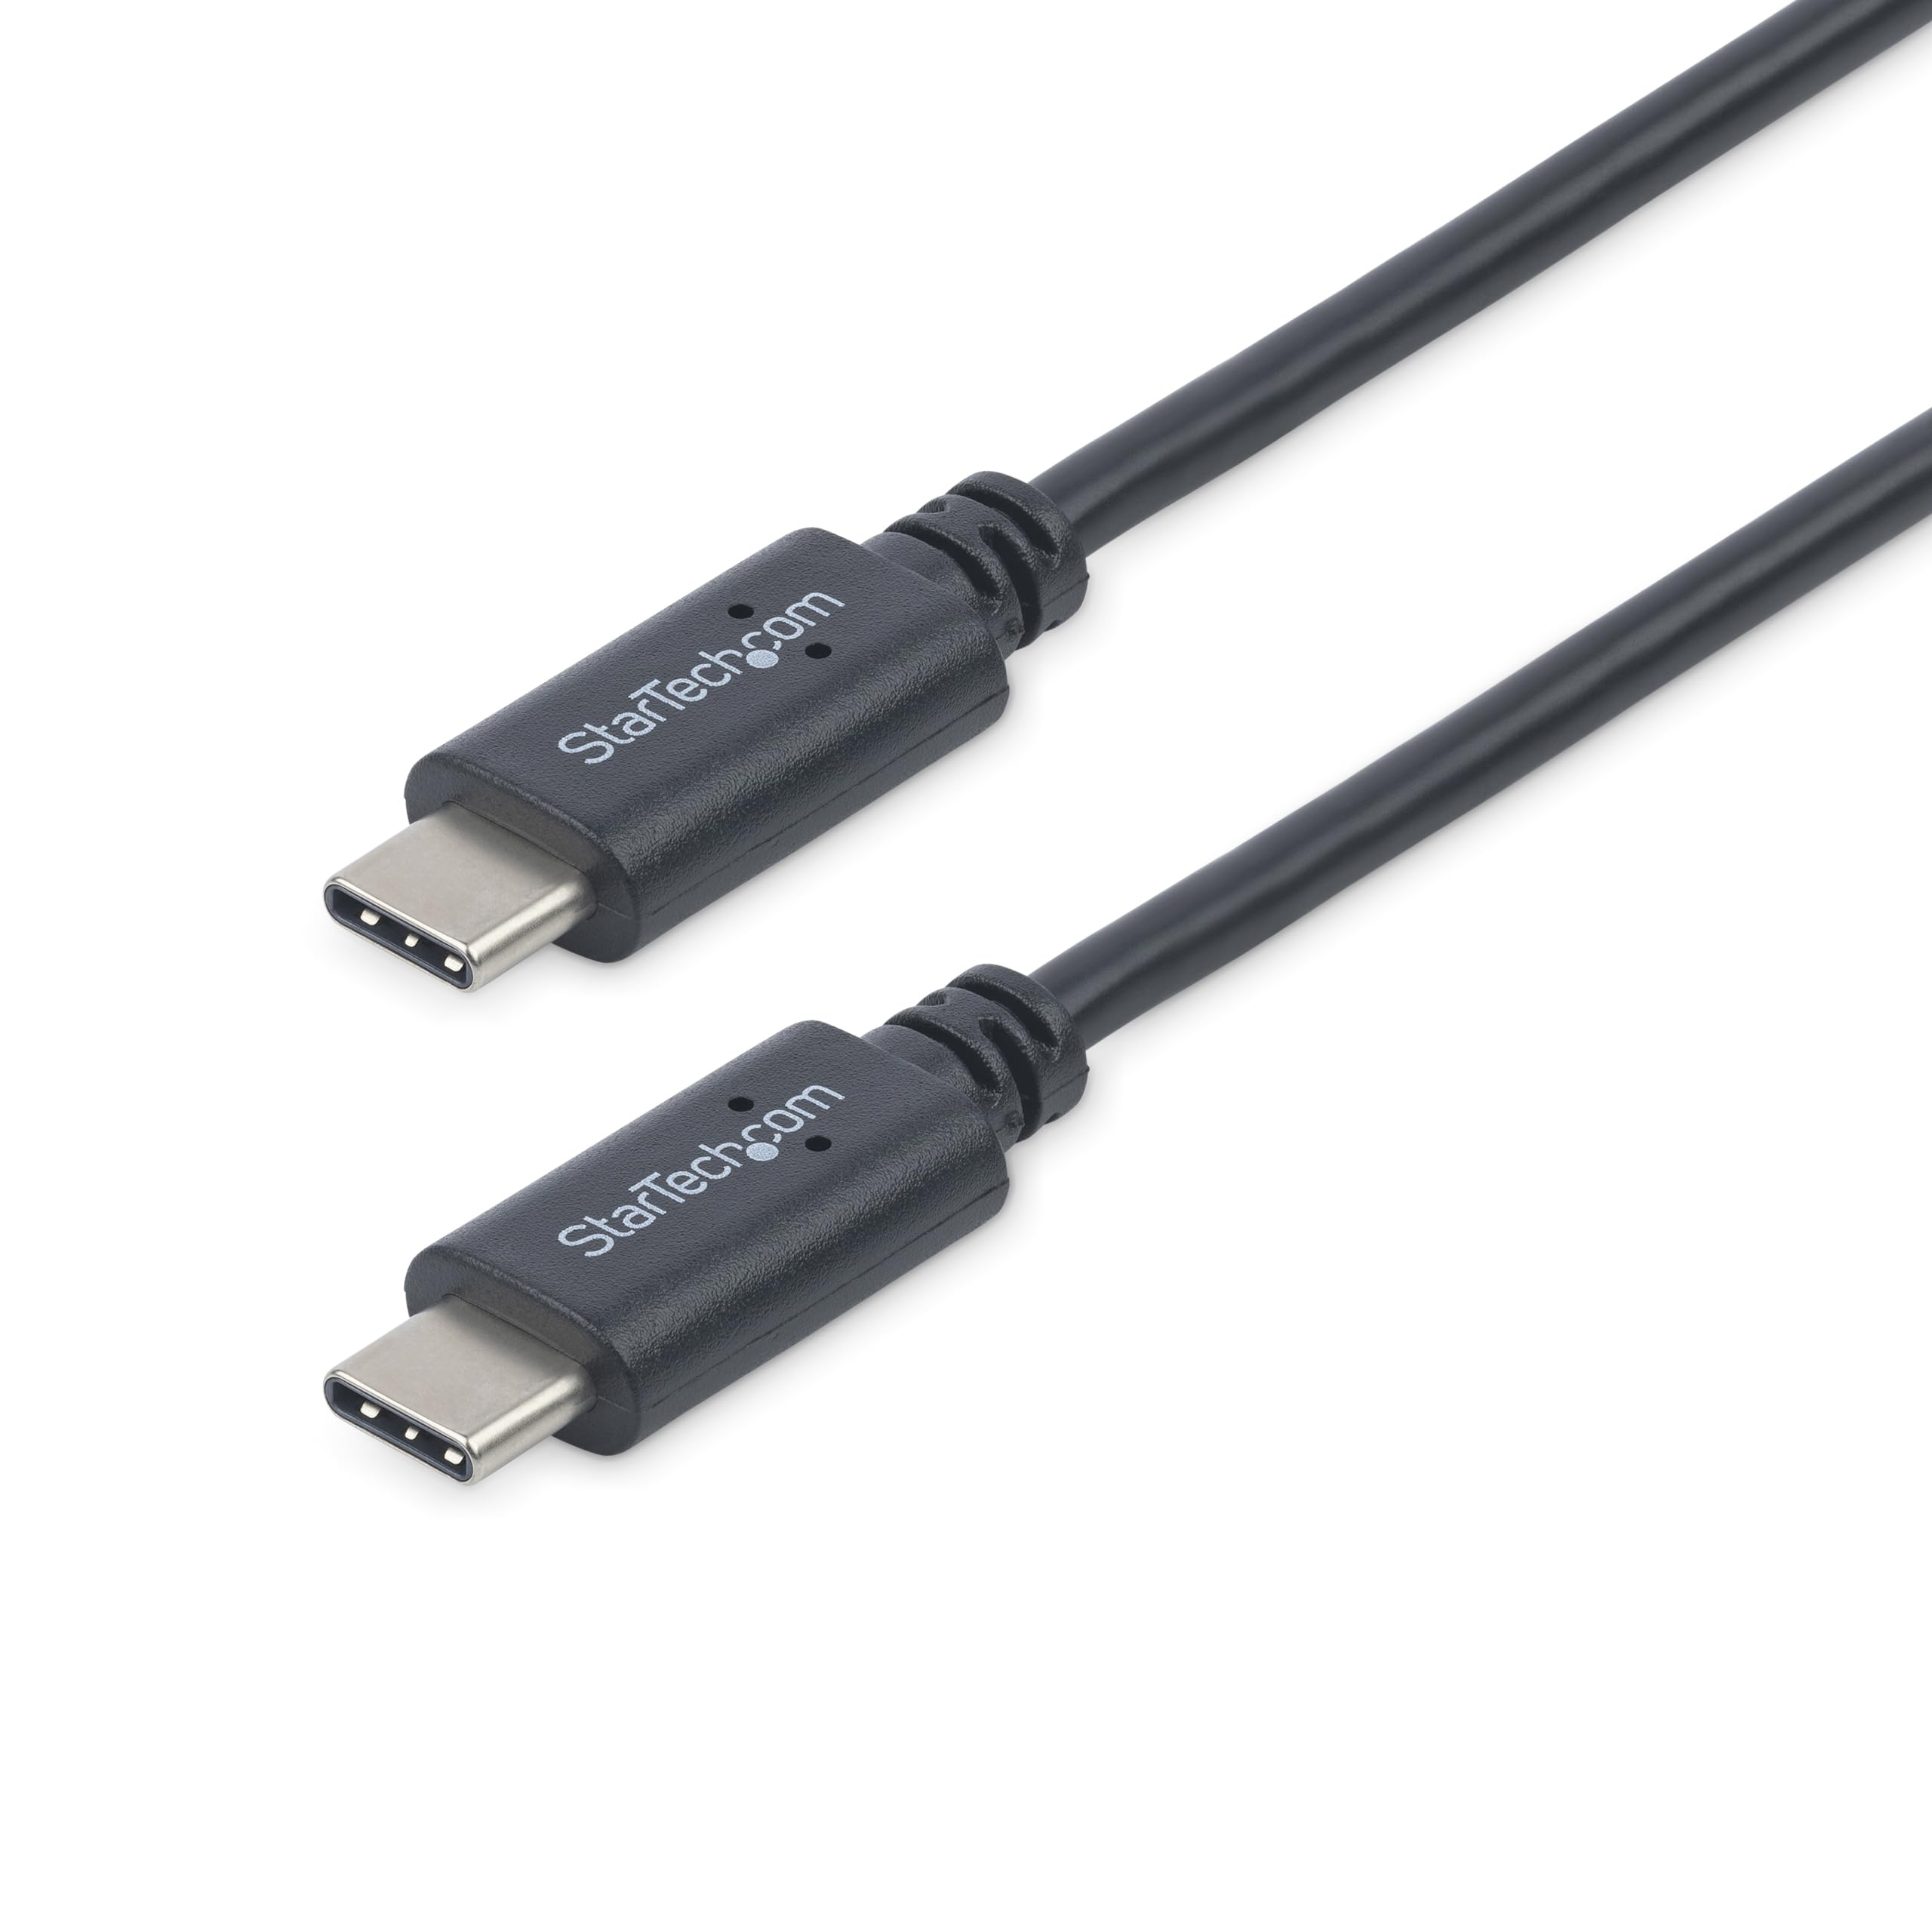 StarTech.com 1m / 3.3ft USB C to USB C Cable - USB 2.0 Type C Cable - M/M - USB-IF Certified - USB C Charging Cable - USB 2.0 (USB2CC1M),Black